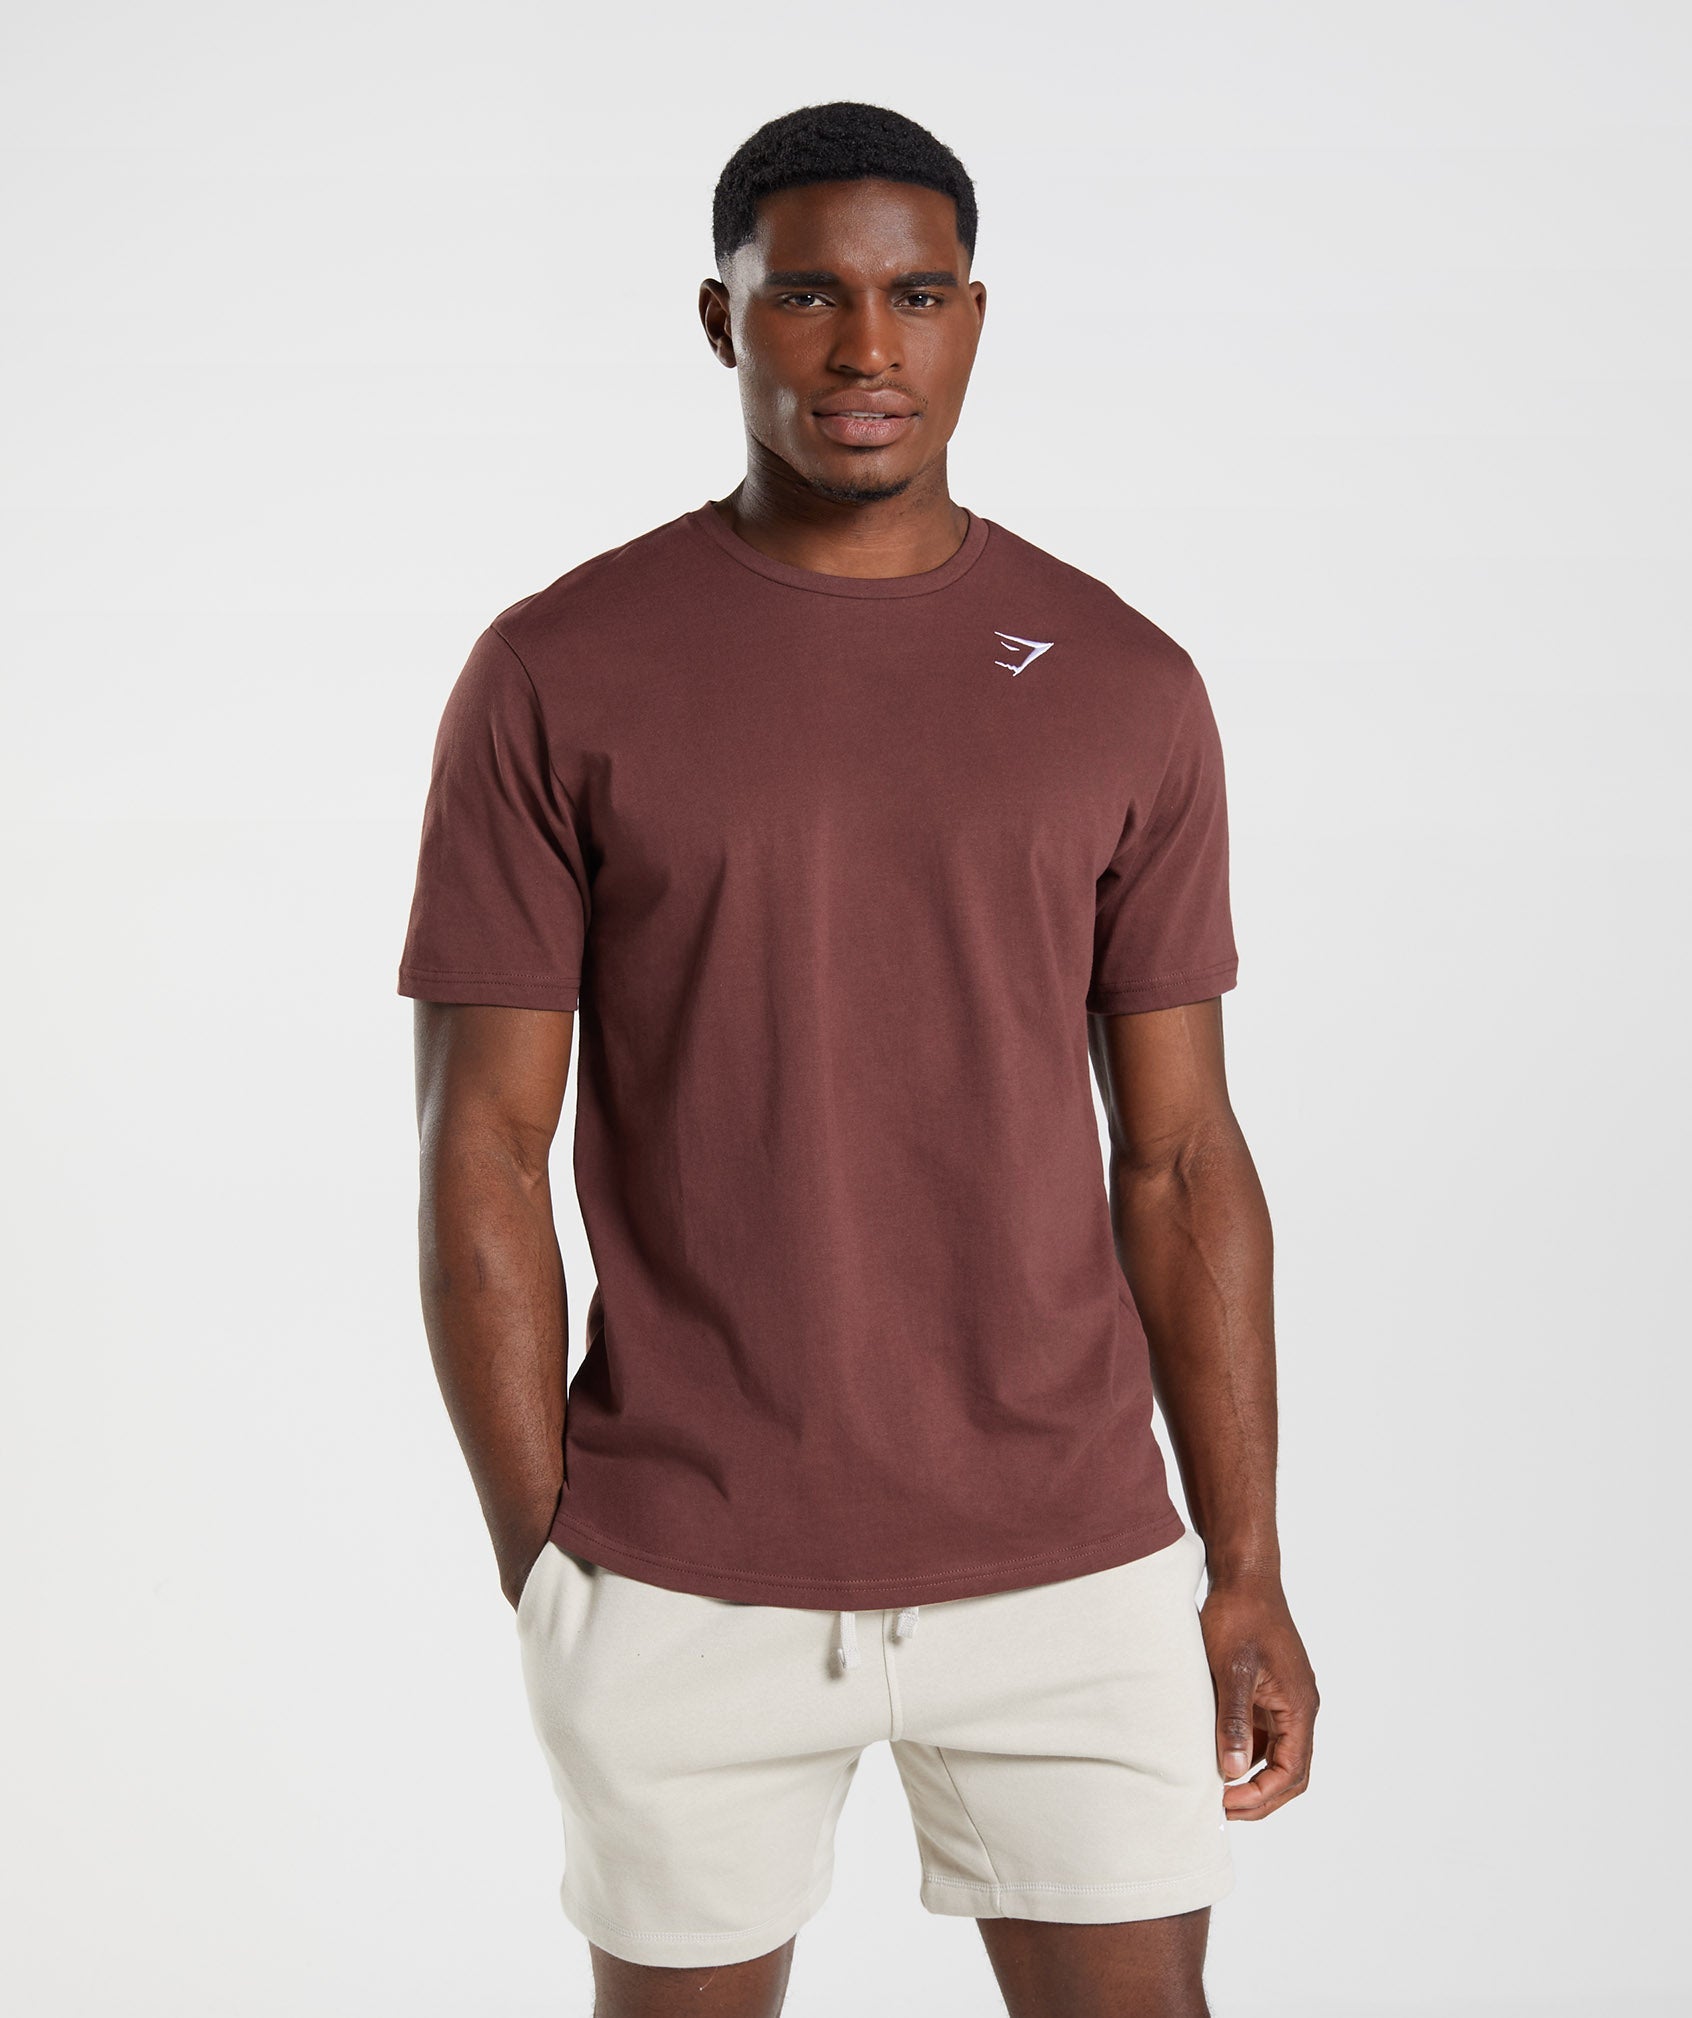 Crest T-Shirt in Cherry Brown - view 1